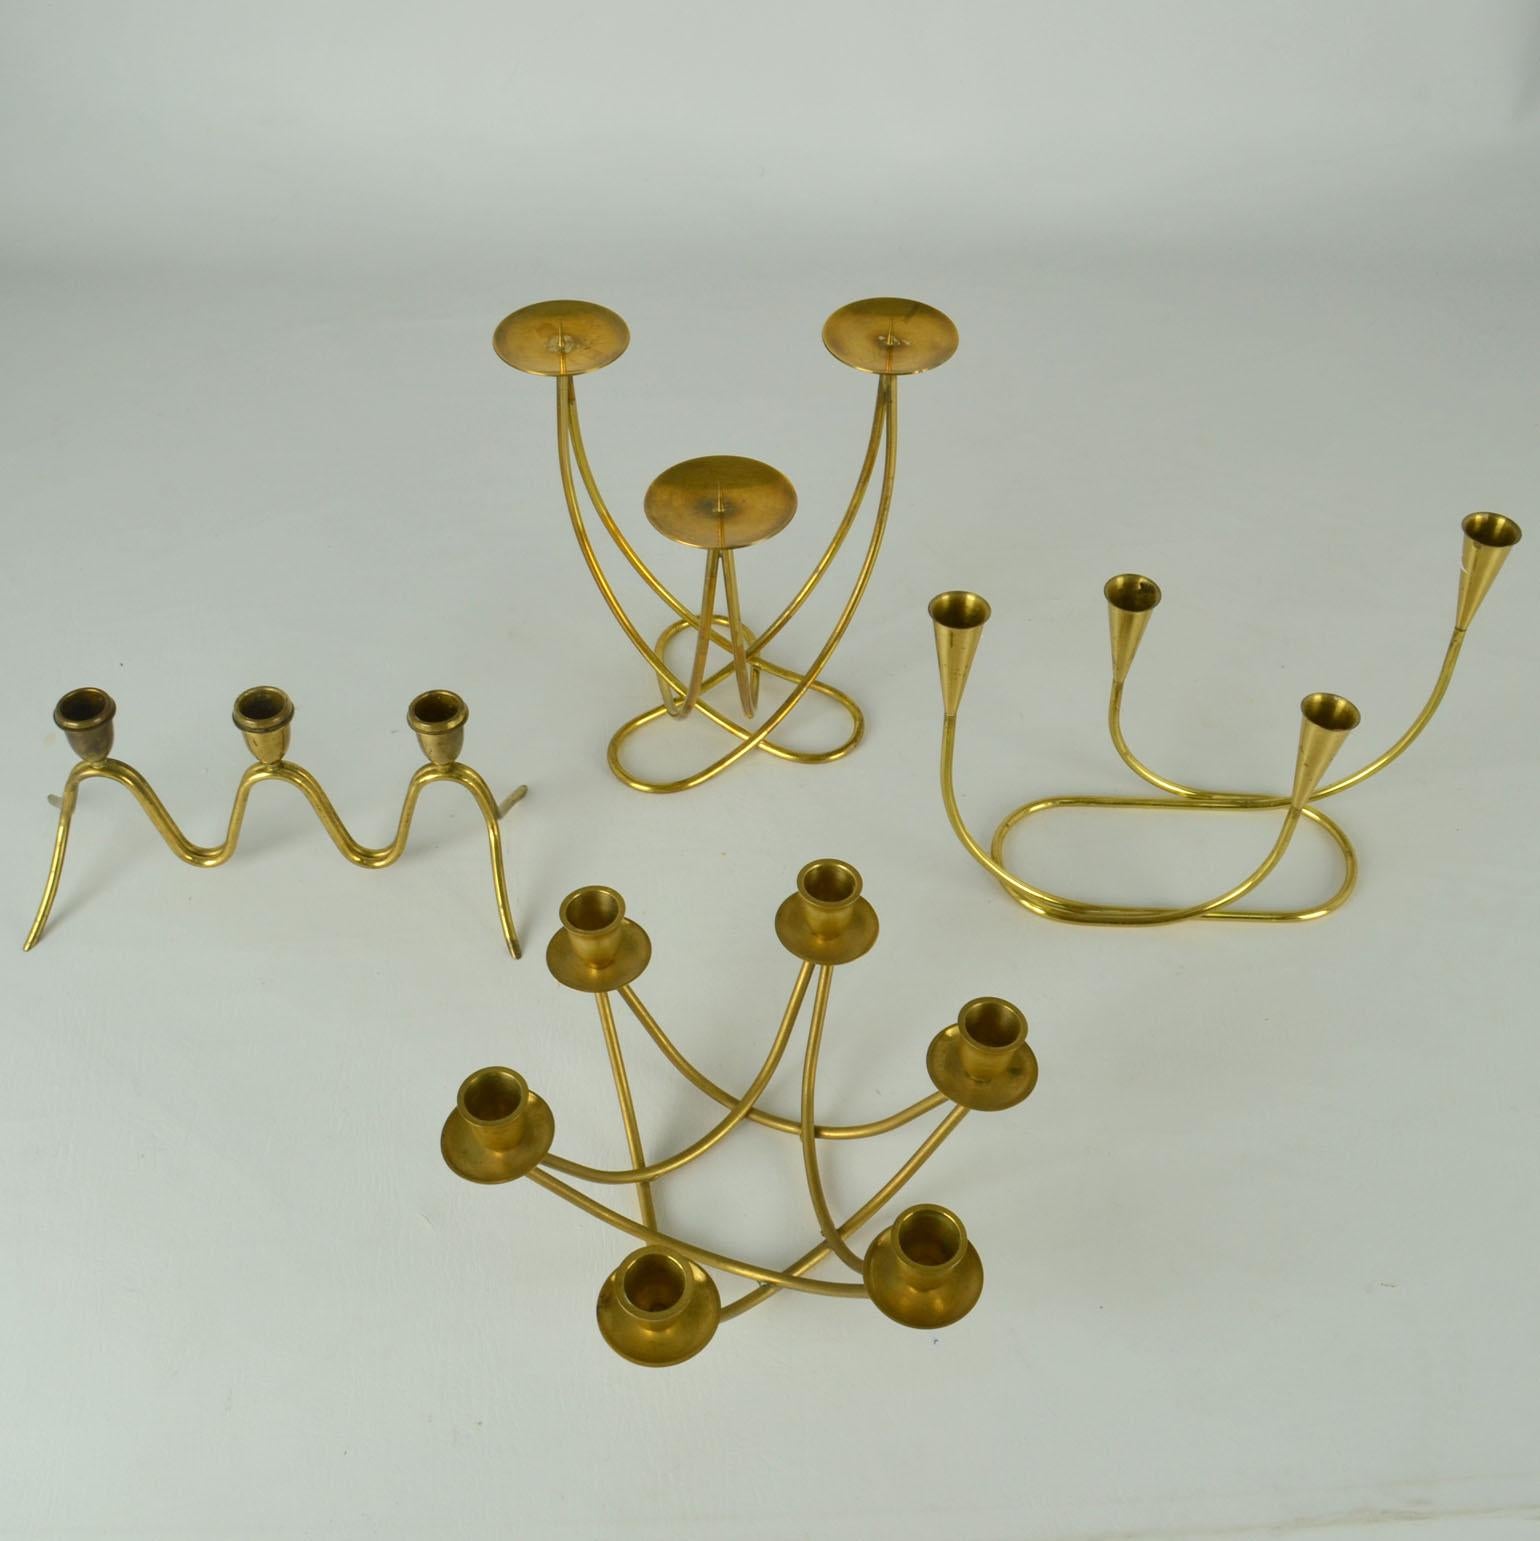 Group of four brass candelabras with organic curves.
One for six regular candles, two for three regular candles and one for three wider candles (D 3-4 cm).